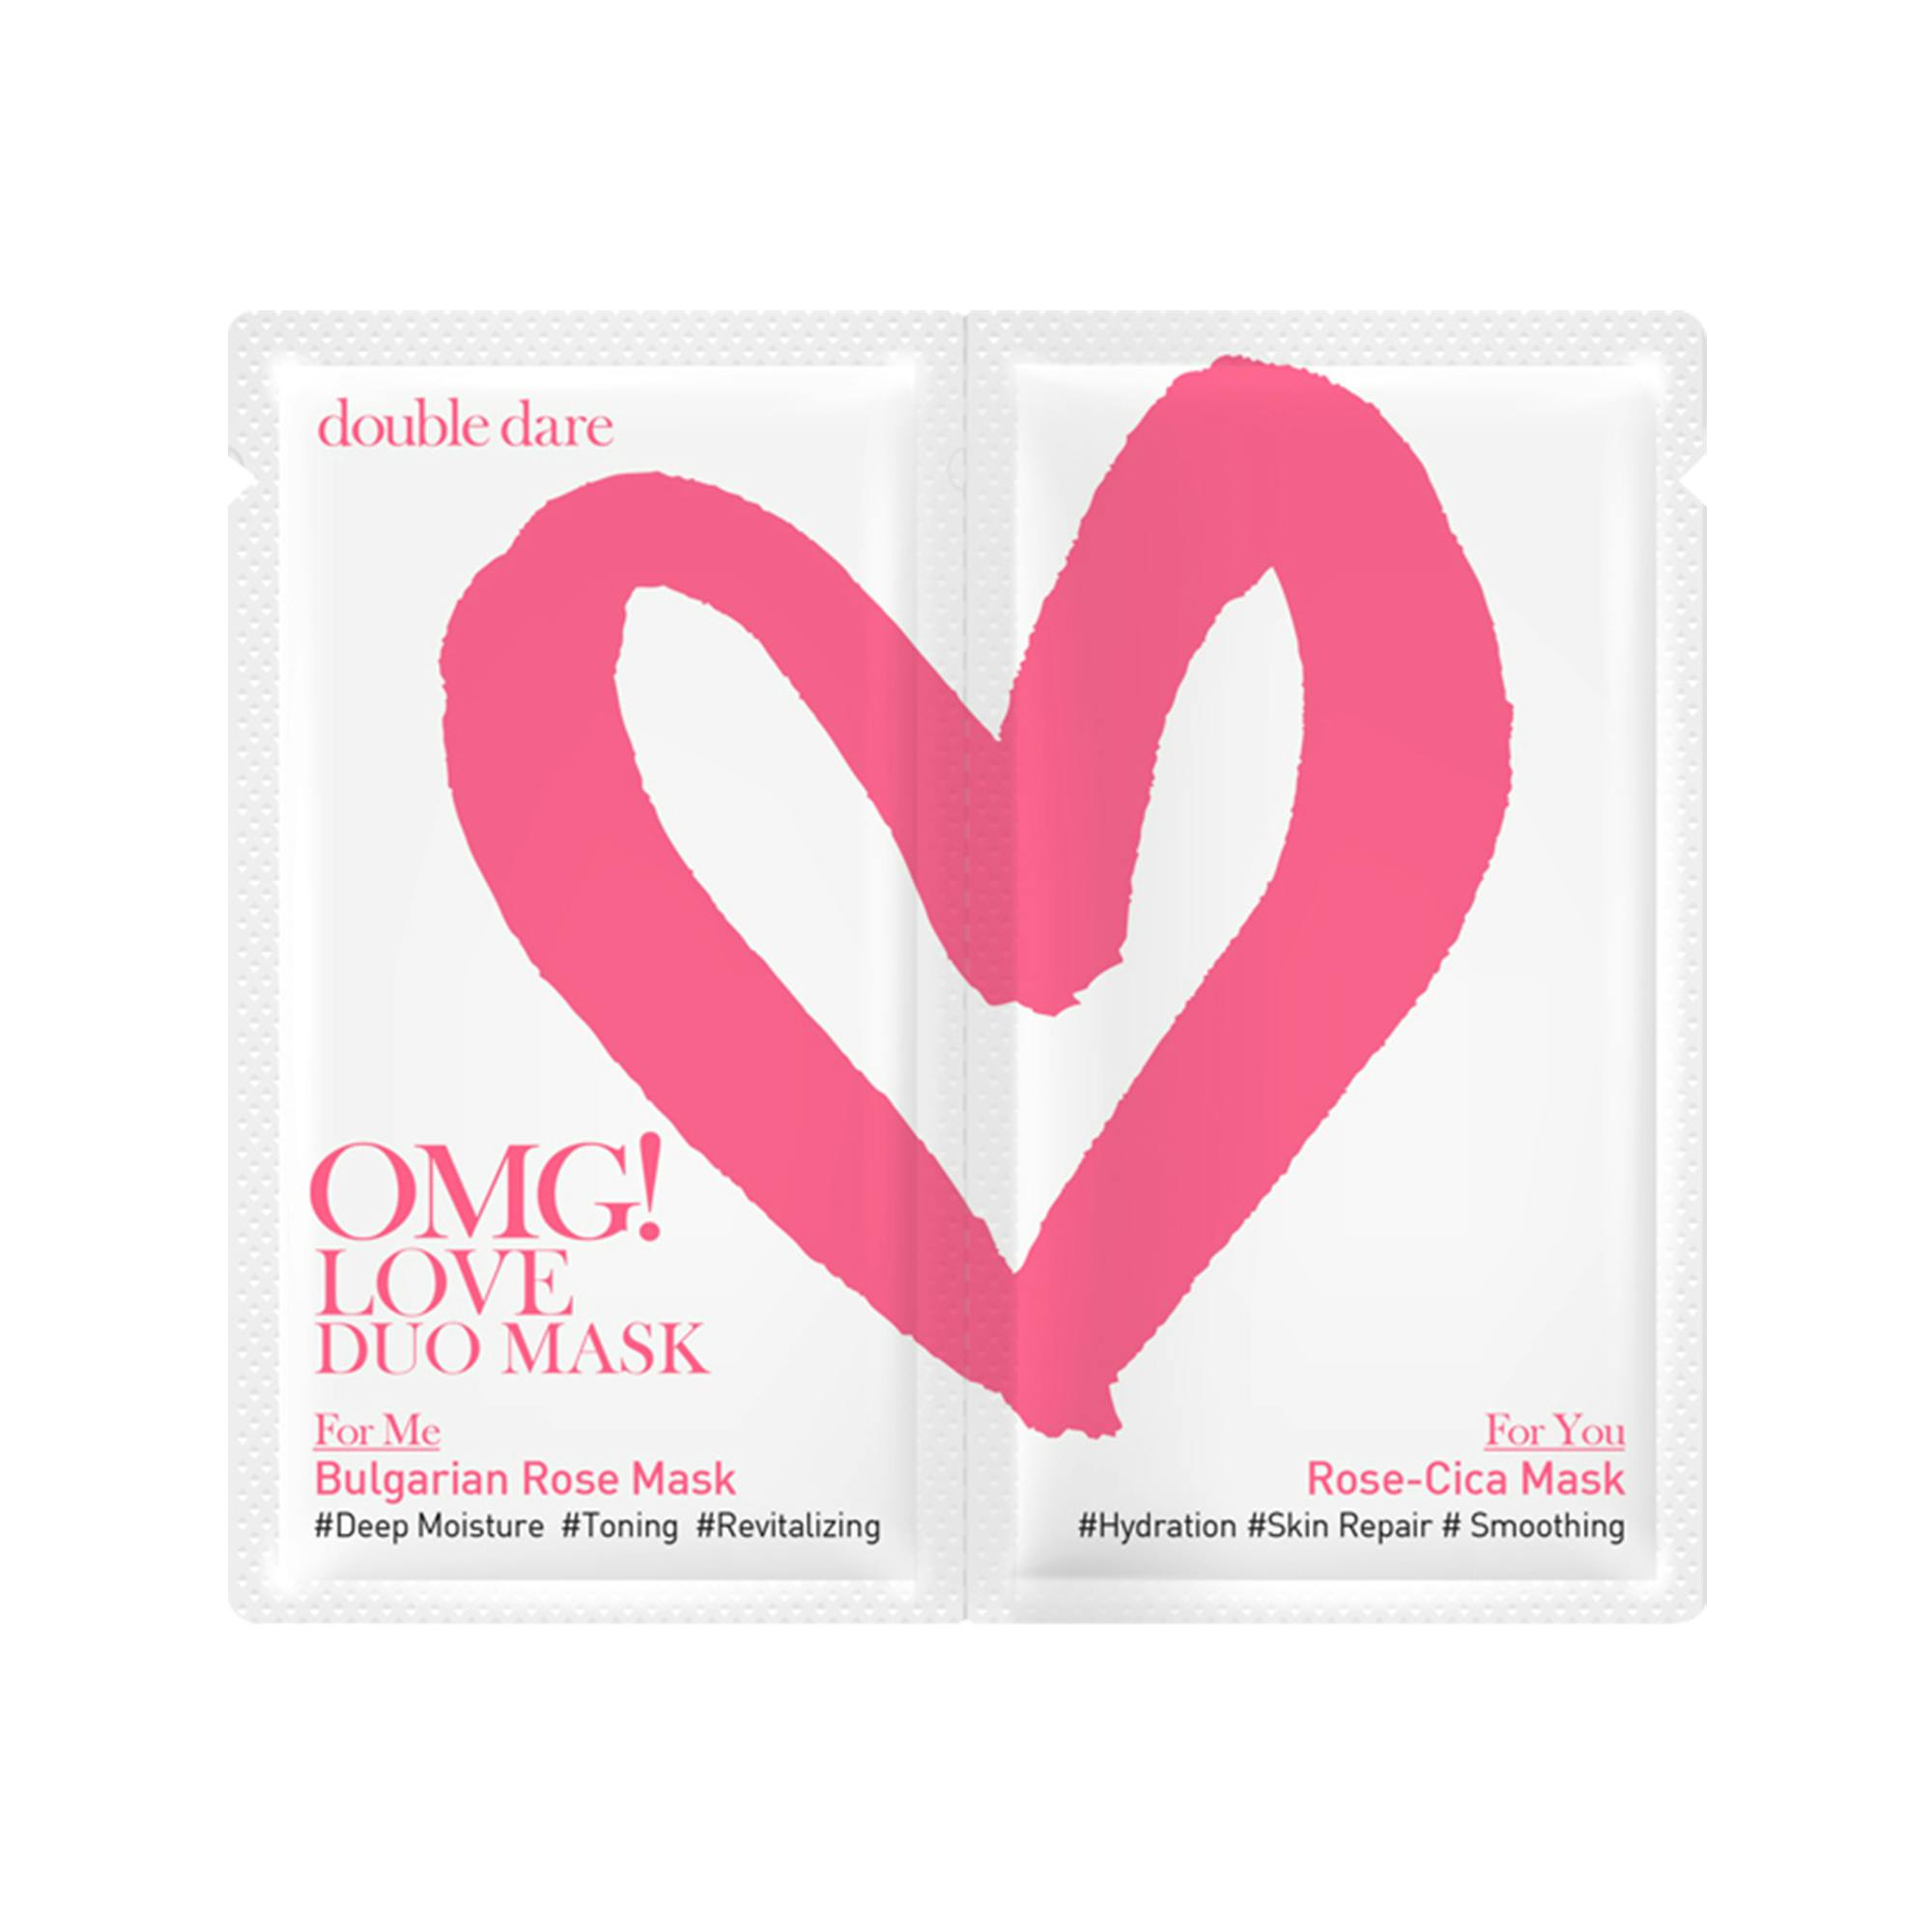 OMG! Double Dare OMG! Love Duo Mask 1 st